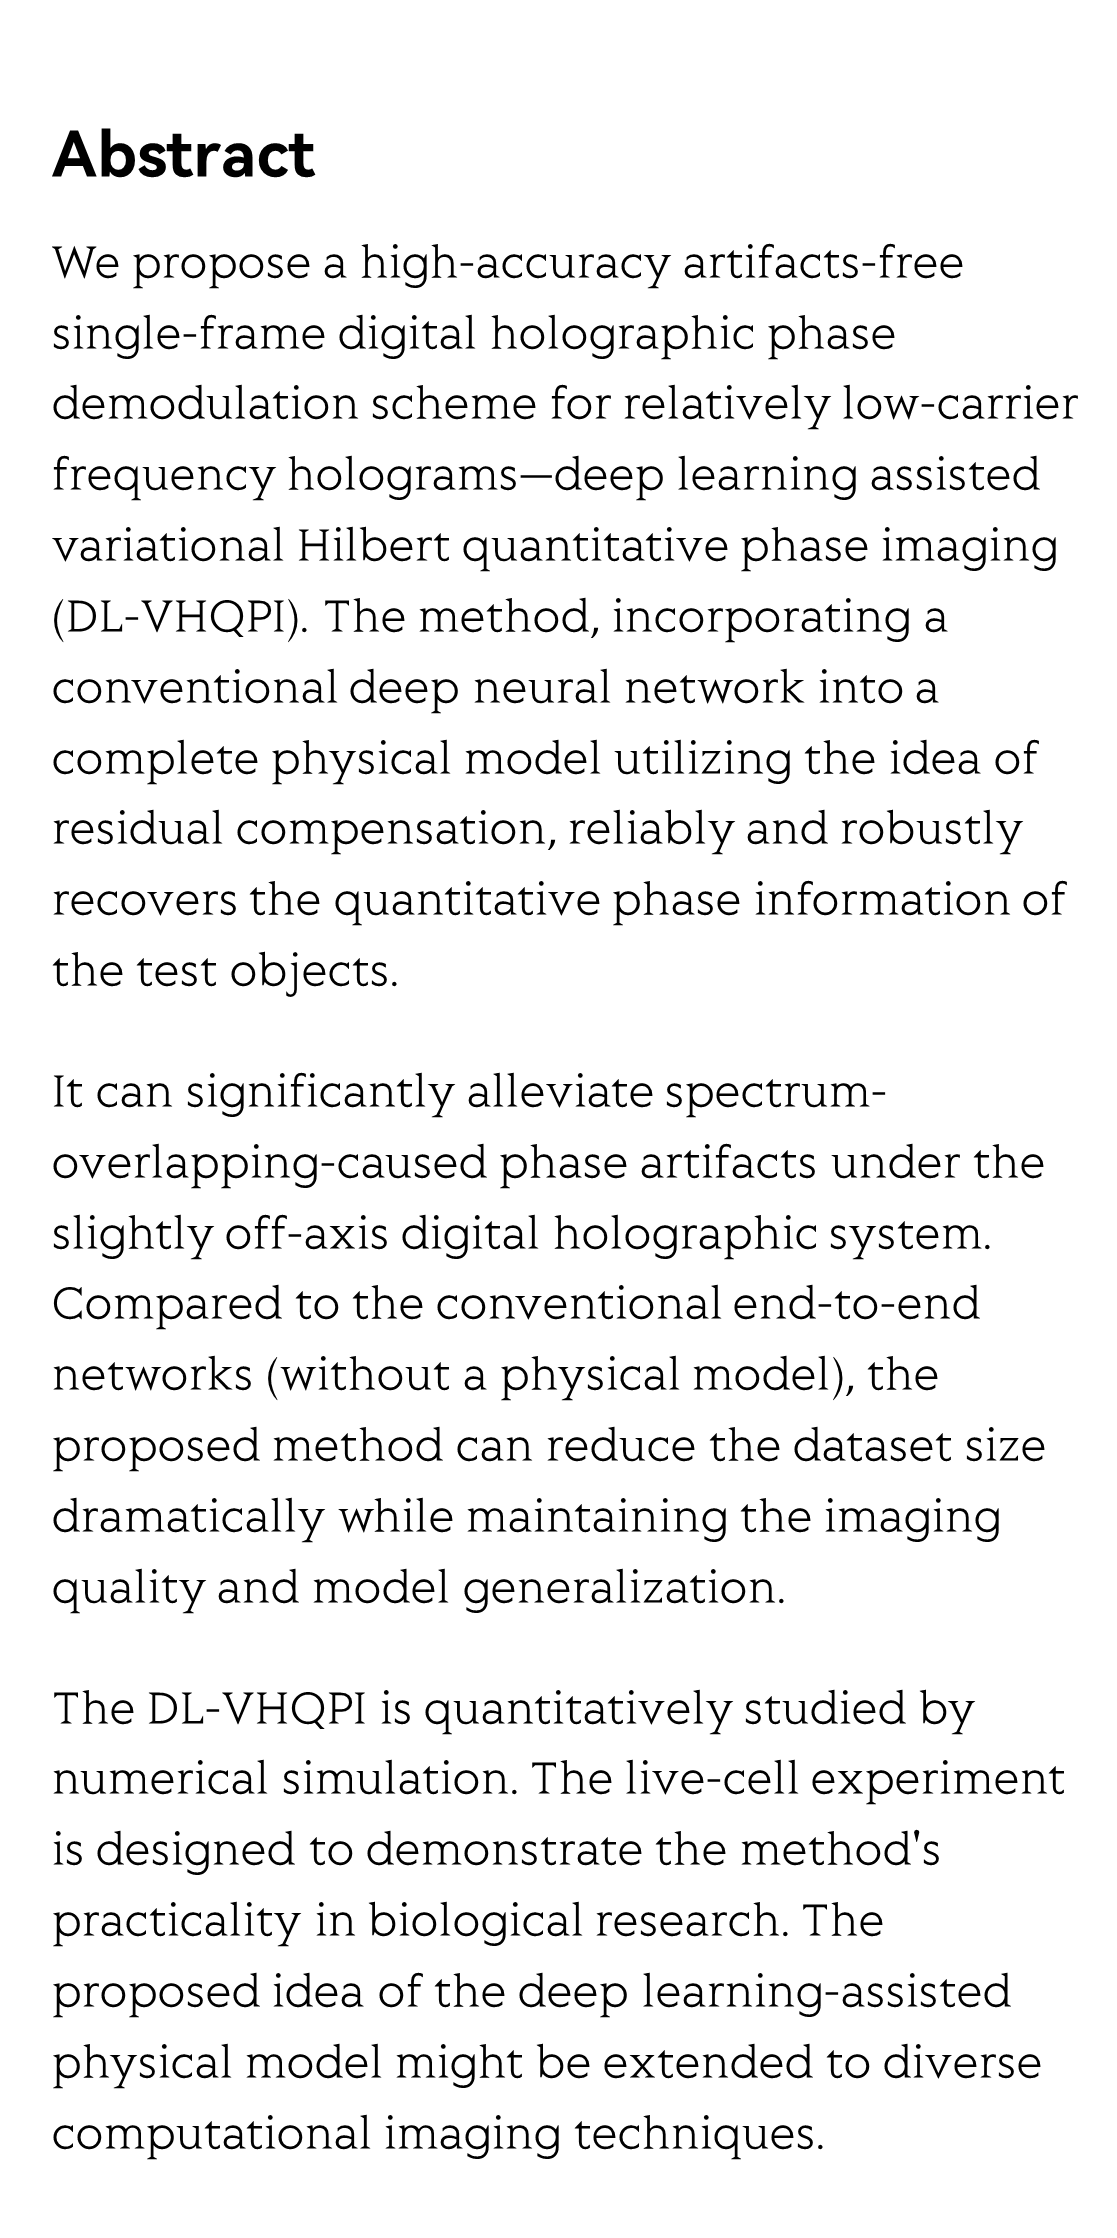 Deep learning assisted variational Hilbert quantitative phase imaging_2